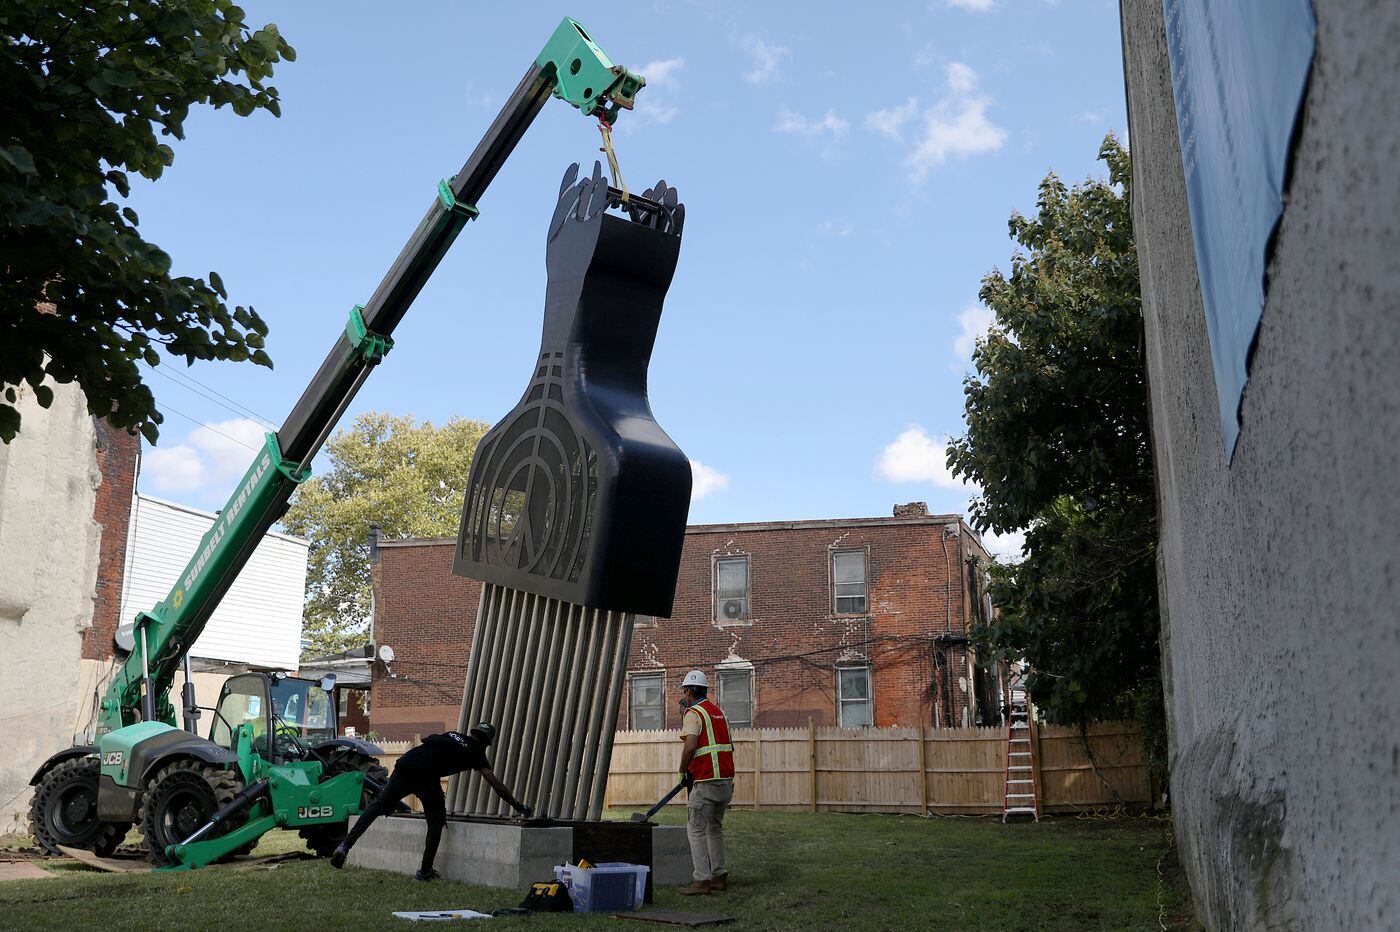 Hank Willis Thomas Has A New Afro Pick Sculpture In West Philly